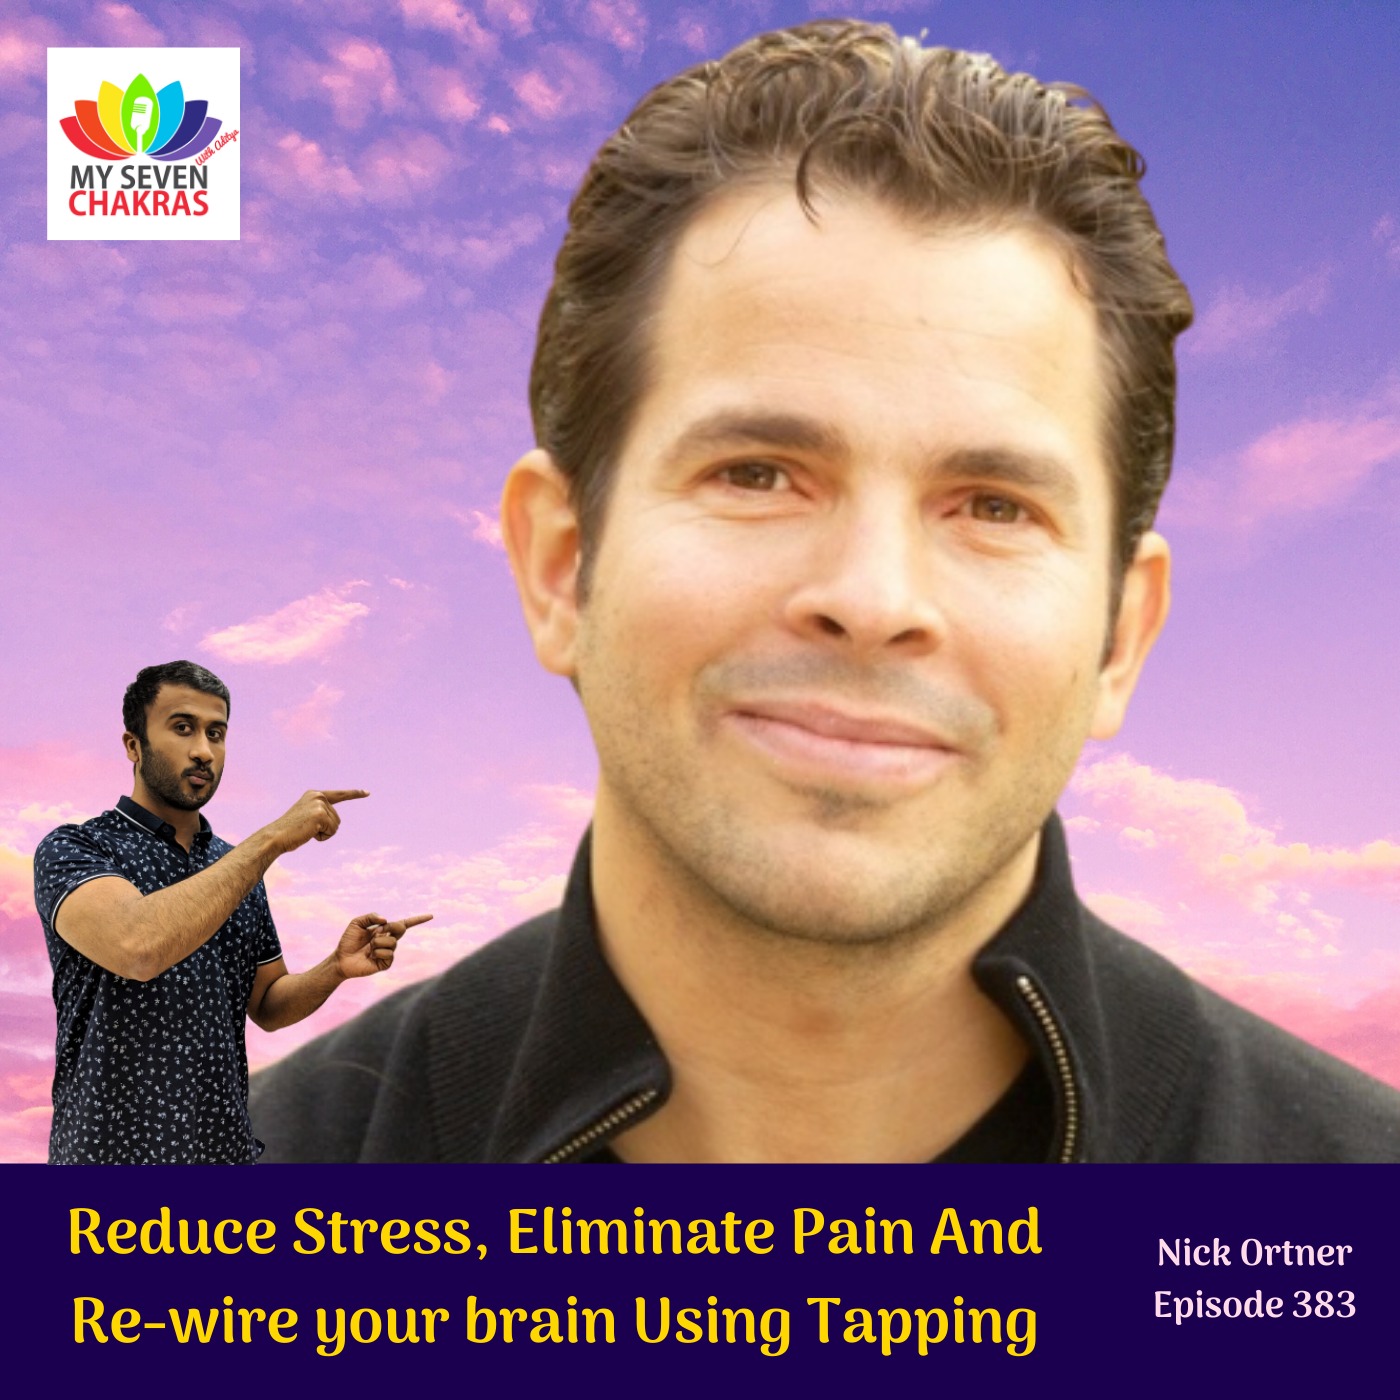 Reduce Stress, Eliminate Pain And Re-wire Your Brain Using Tapping With Nick Ortner